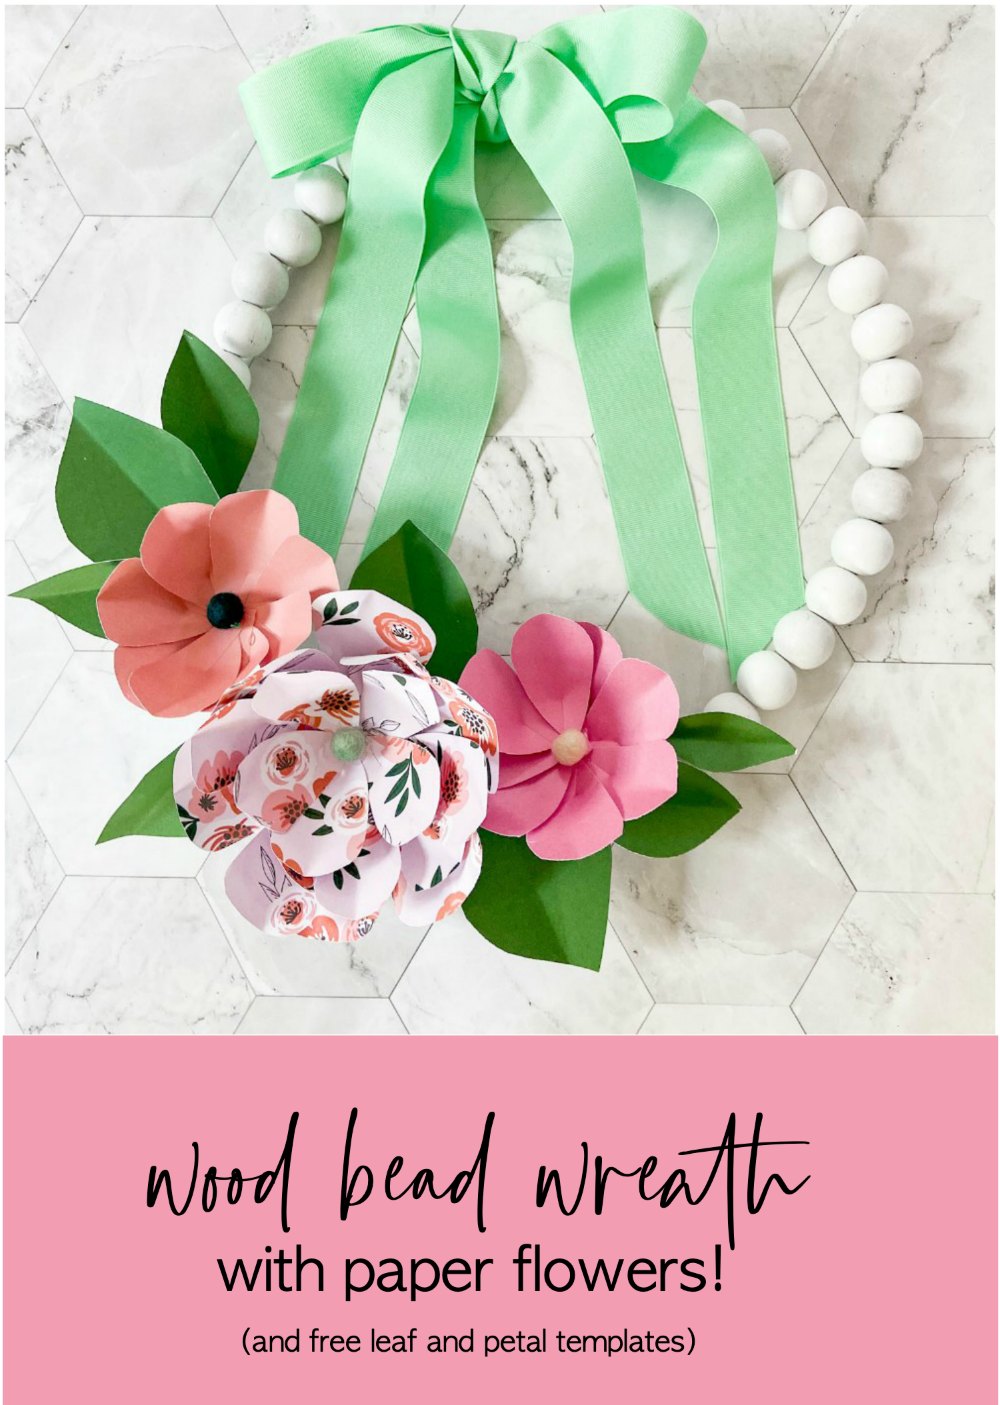 How to make a wood bead wreath with paper flowers